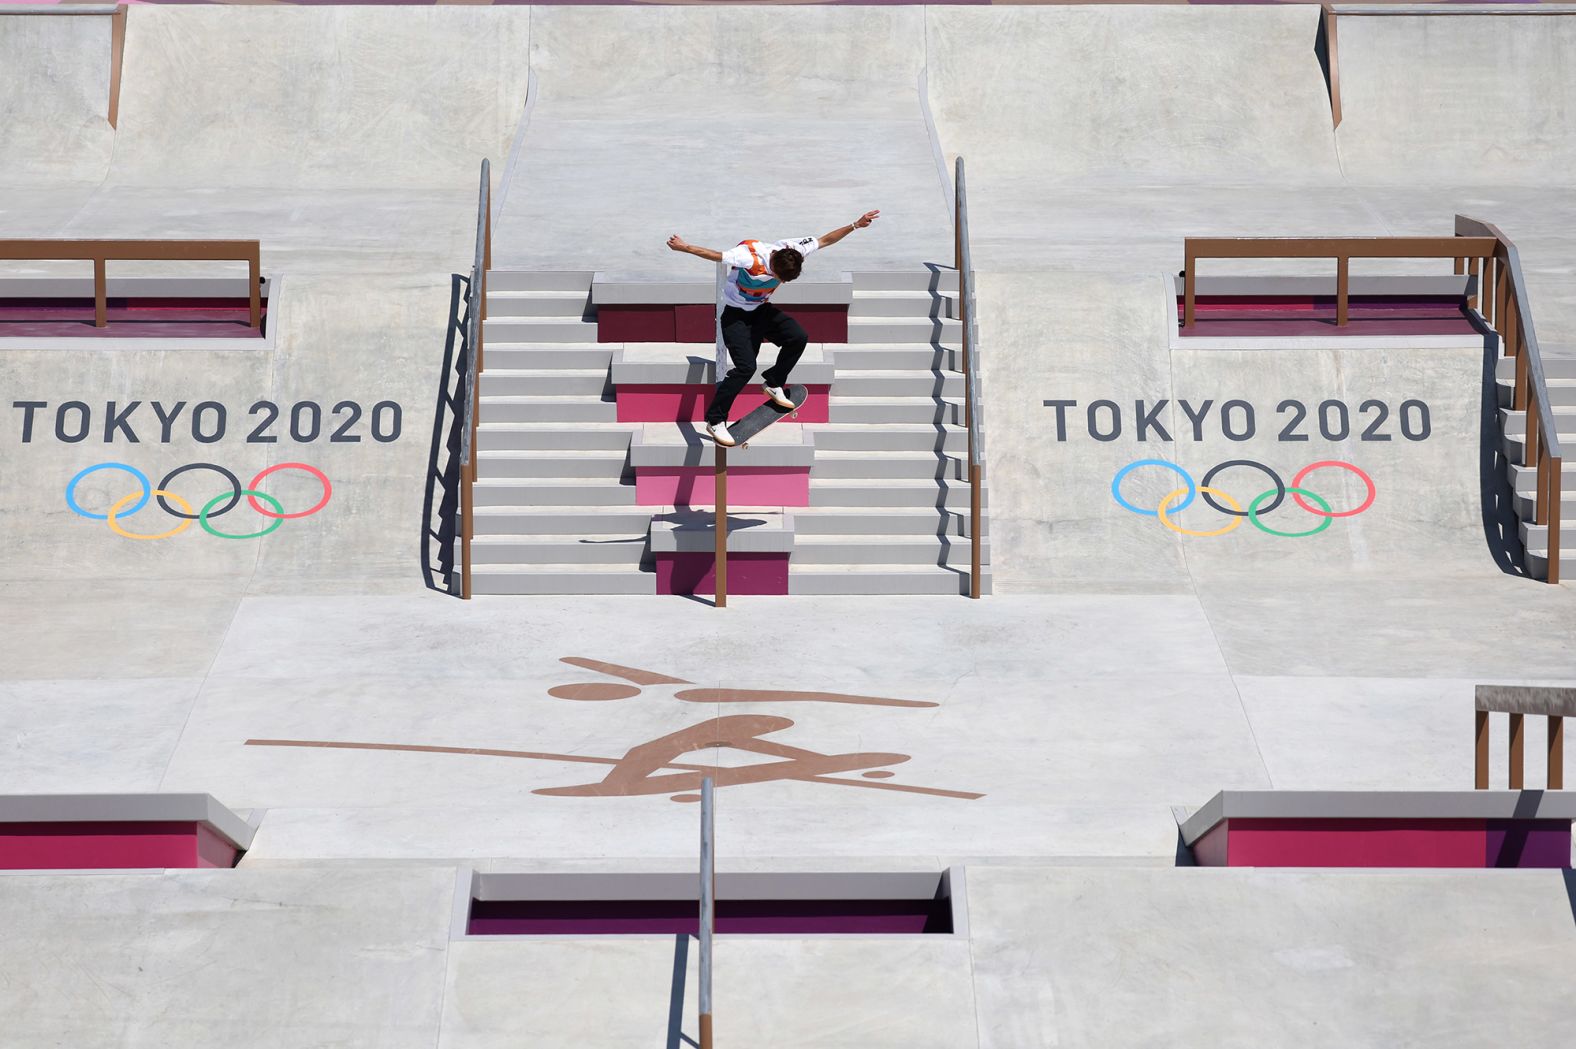 Japan's Yuto Horigome competes in street skateboarding on July 25. Horigome went on to win <a href="index.php?page=&url=https%3A%2F%2Fwww.cnn.com%2Fworld%2Flive-news%2Ftokyo-2020-olympics-07-25-21-spt%2Fh_73a2a2d298ed1769881ee10c0f45f302" target="_blank">the first-ever Olympic gold medal in skateboarding.</a>